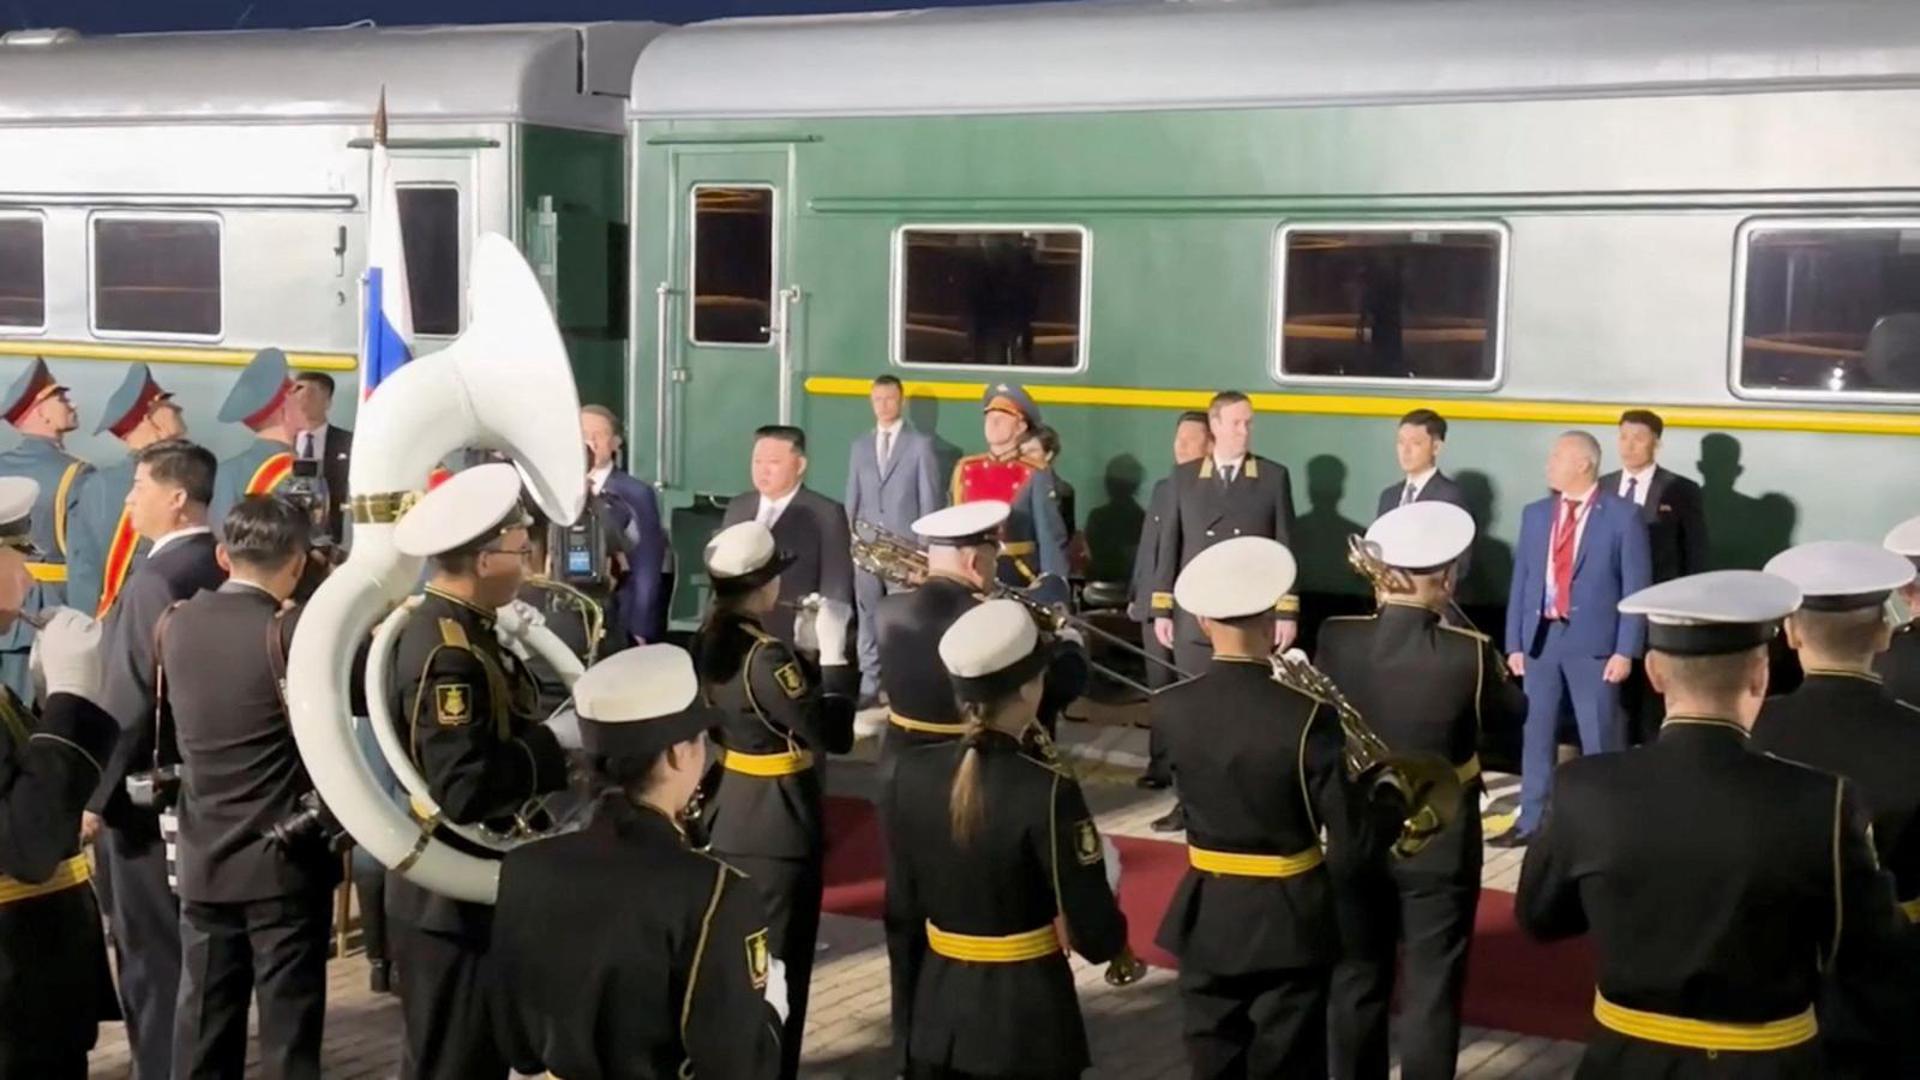 A view shows North Korean leader Kim Jong Un during a welcoming ceremony upon his arrival in Khasan in the Primorsky region, Russia, in this still image from video published September 12, 2023. Courtesy Governor of Russia's Primorsky Krai Oleg Kozhemyako Telegram Channel via REUTERS ATTENTION EDITORS - THIS IMAGE WAS PROVIDED BY A THIRD PARTY. NO RESALES. NO ARCHIVES. MANDATORY CREDIT. Photo: OLEG KOZHEMYAKO TELEGRAM CHANNEL/REUTERS